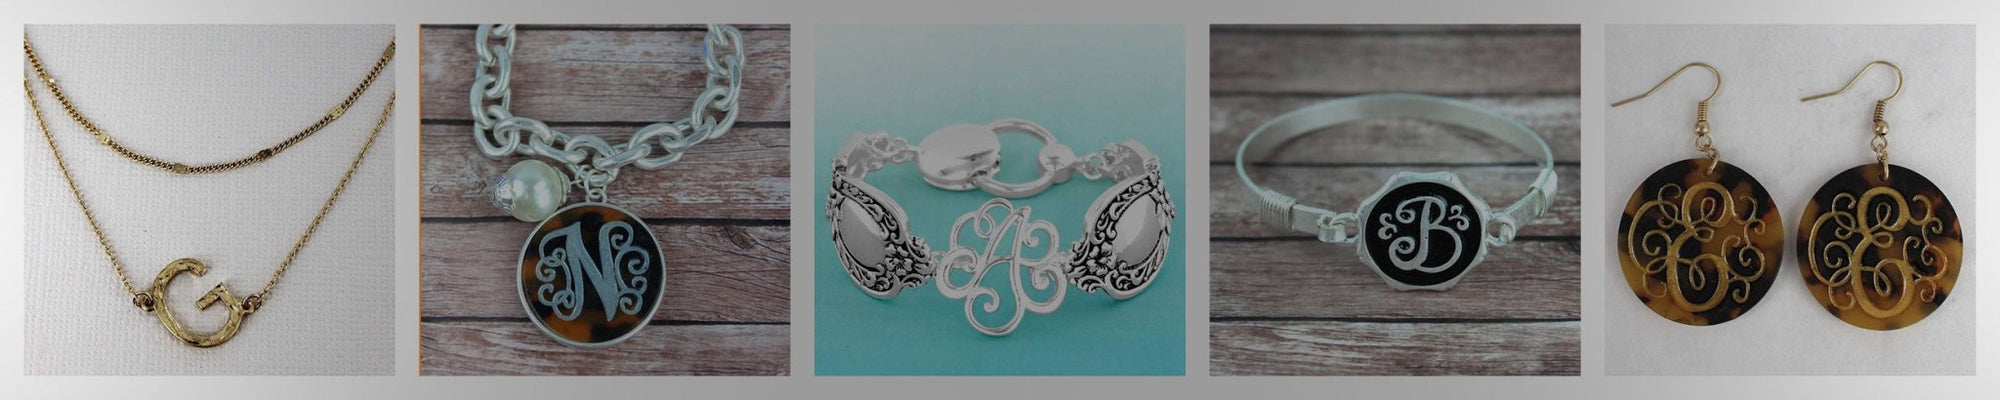 Get Personal: Five Must-Have Pieces Of Monogram Jewelry - Wholesale Accessory Market